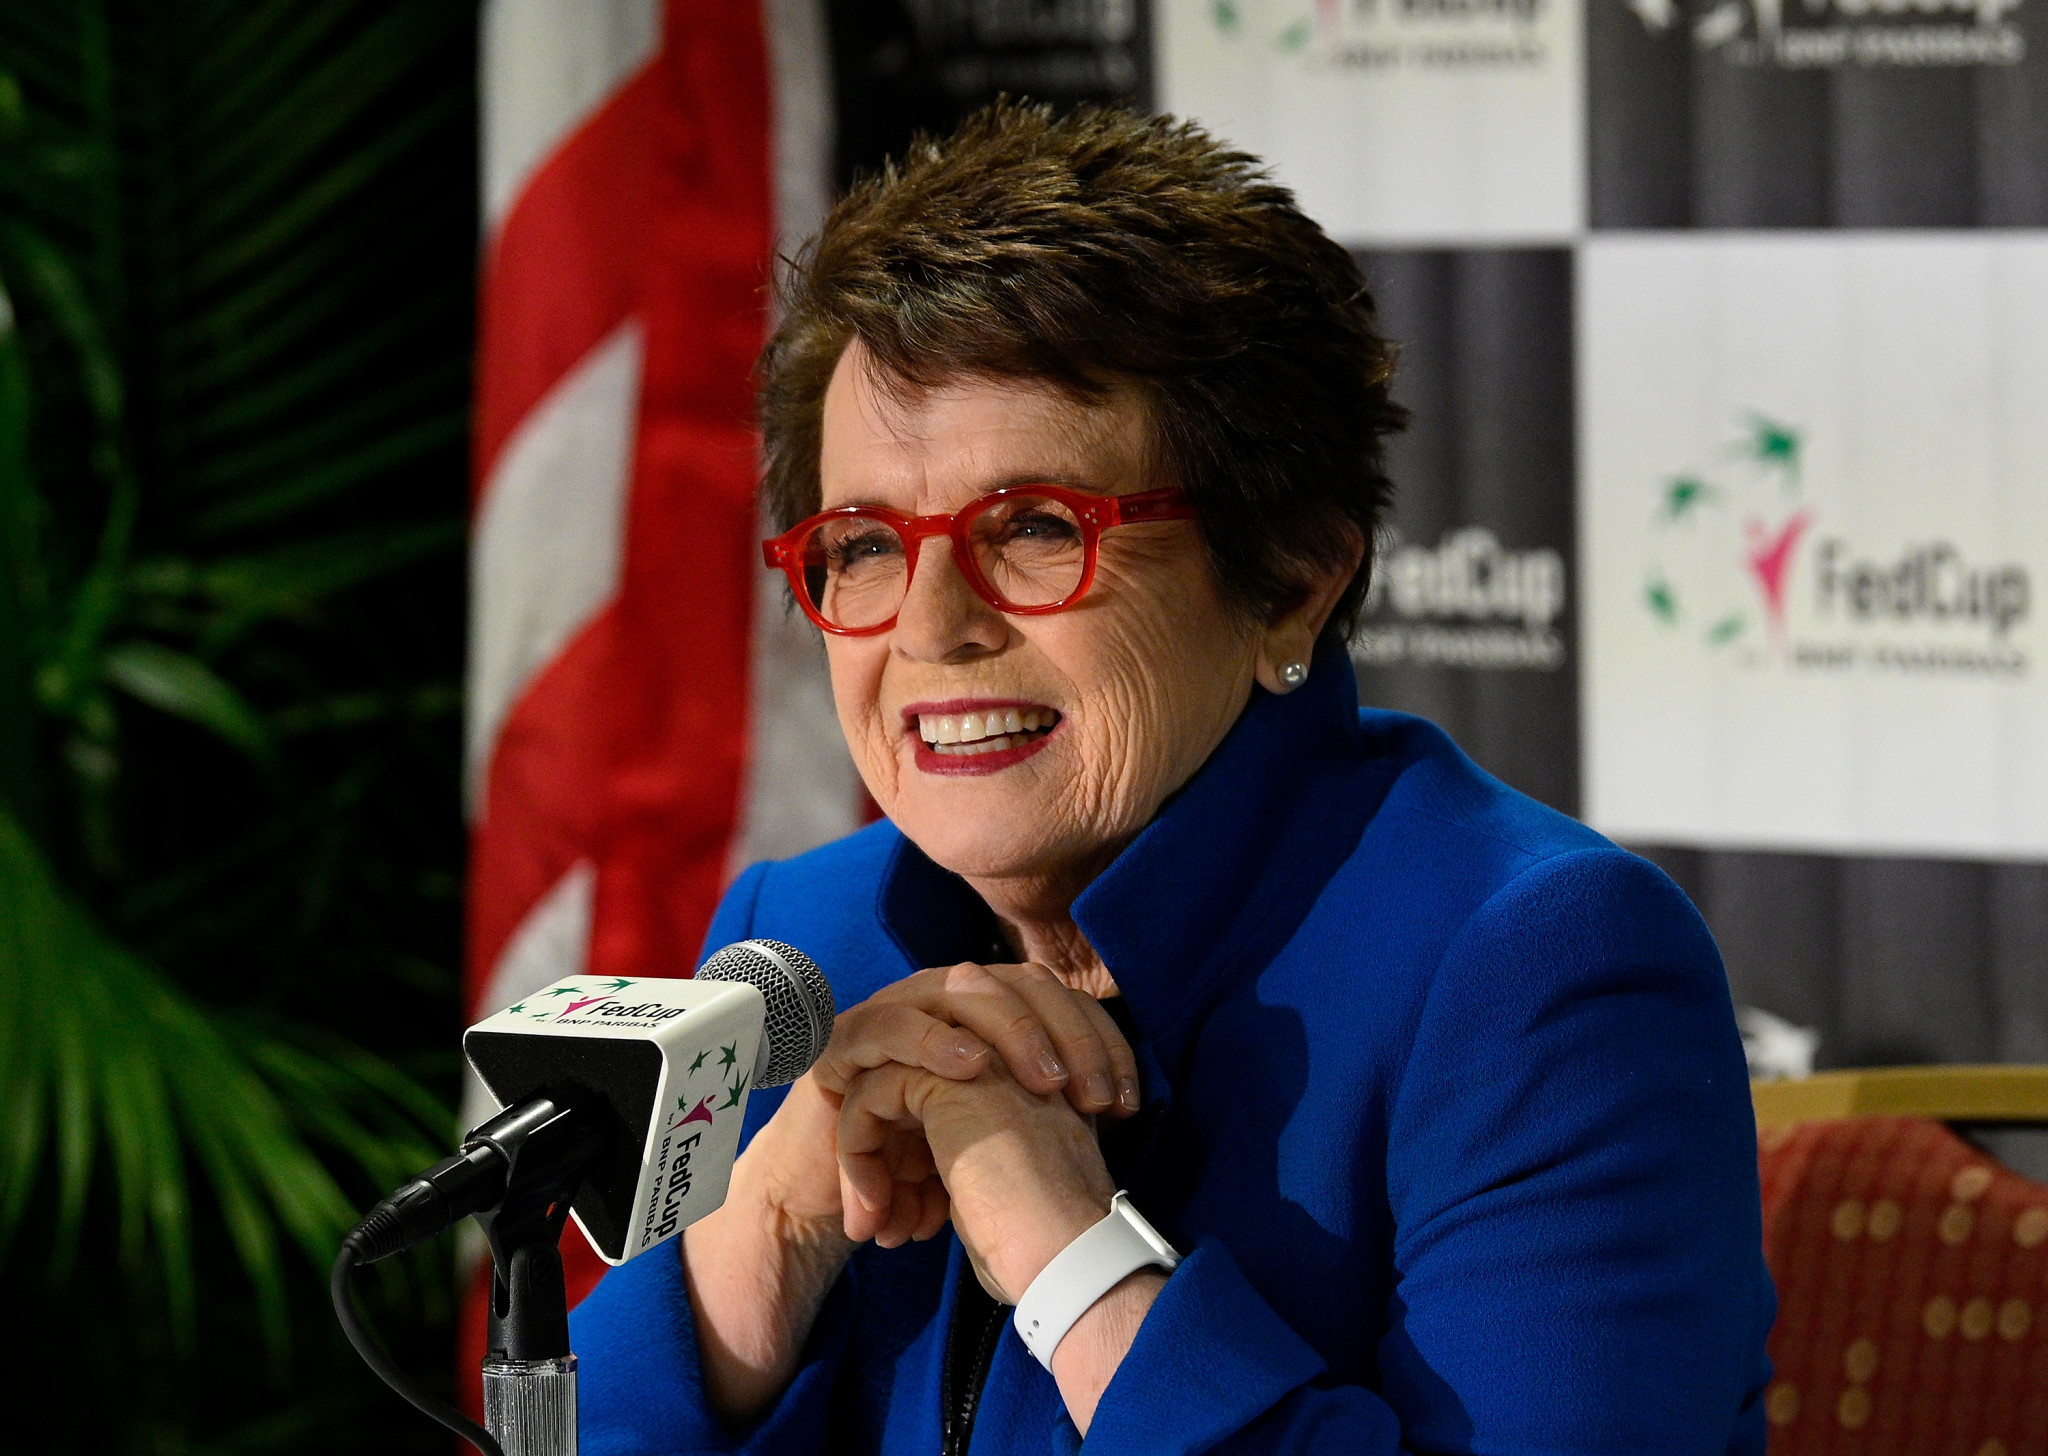 The Fed Cup was renamed after American tennis legend Billie Jean King in September ©Getty Images